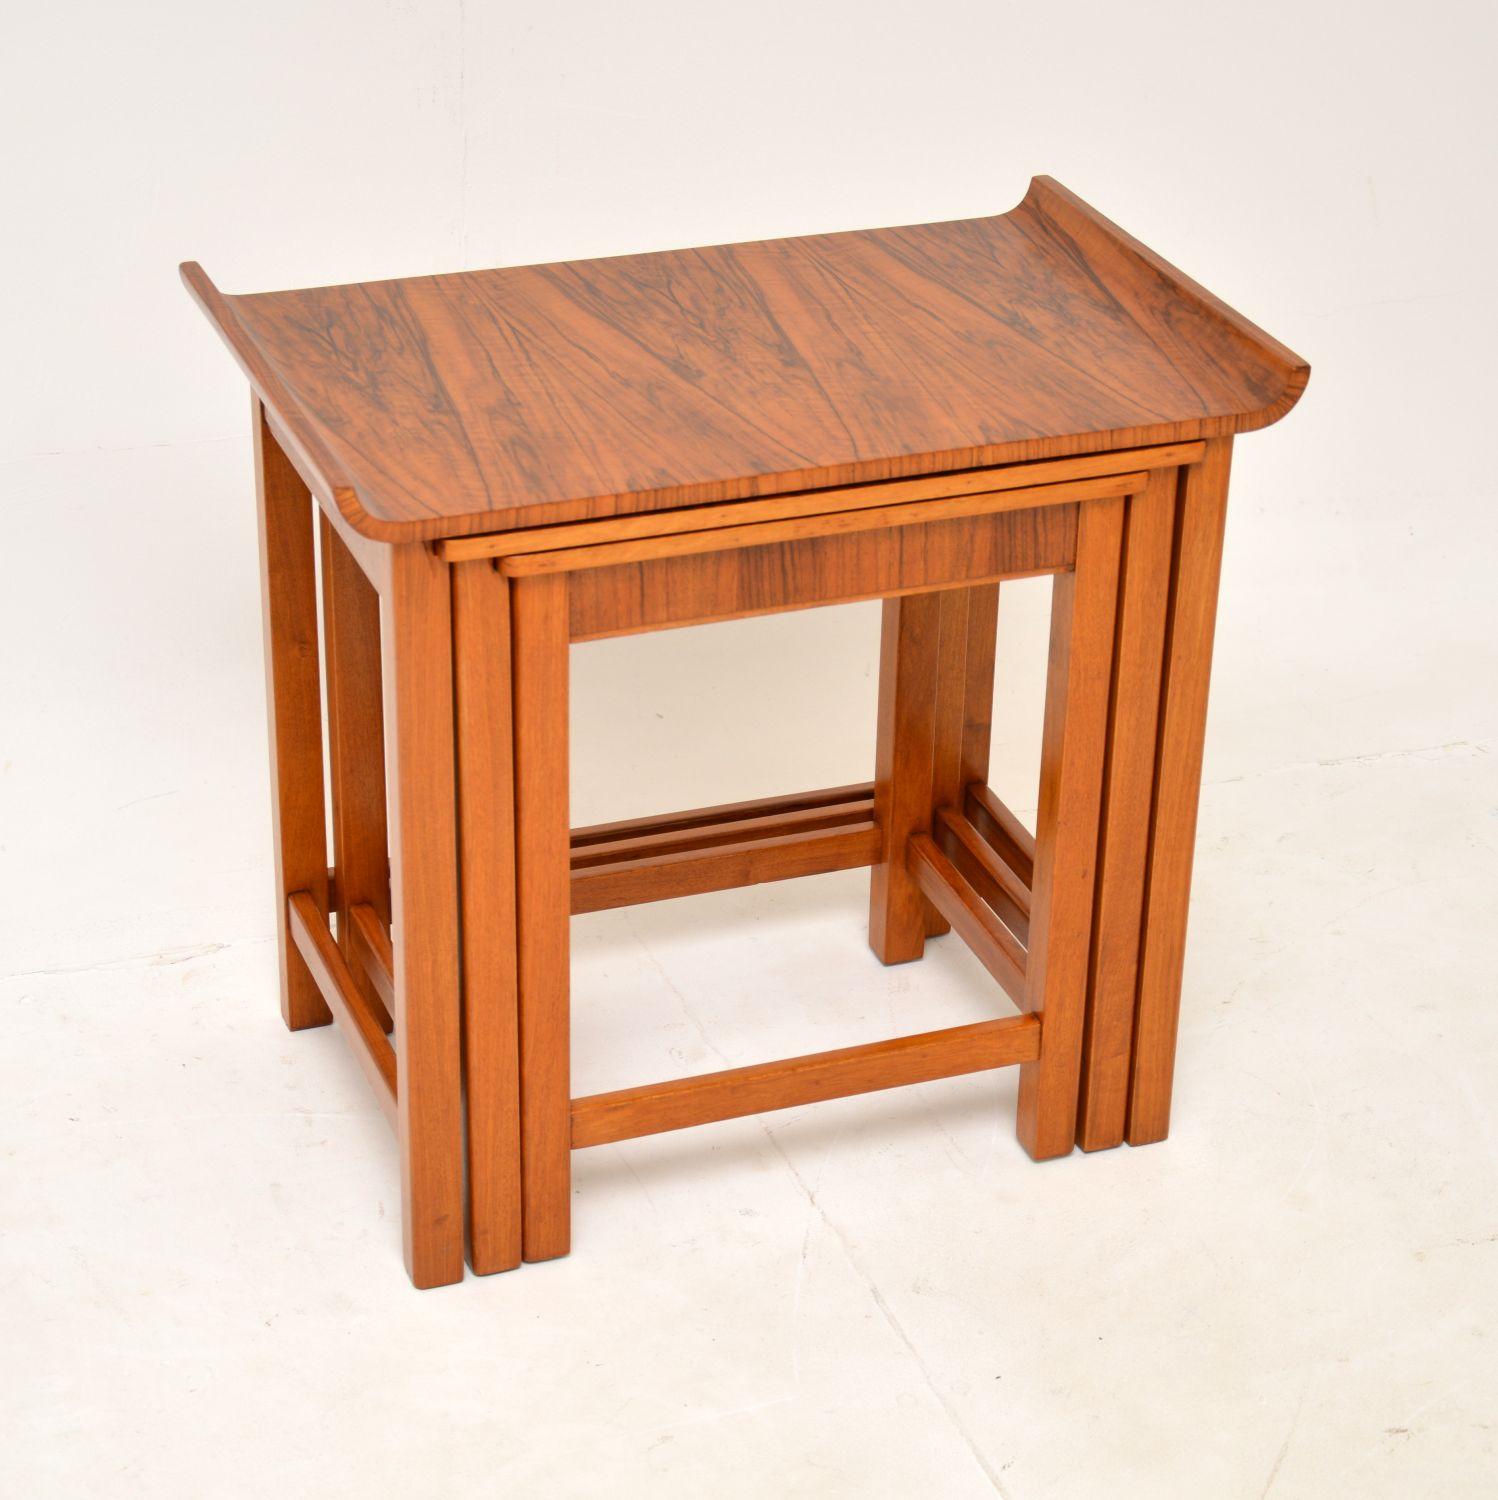 A superb original Art Deco period figured walnut nest of tables, these were made in England and date from around the 1920-30’s.

They are of amazing quality and have a very stylish design. The tables nestle under one another very smoothly, the